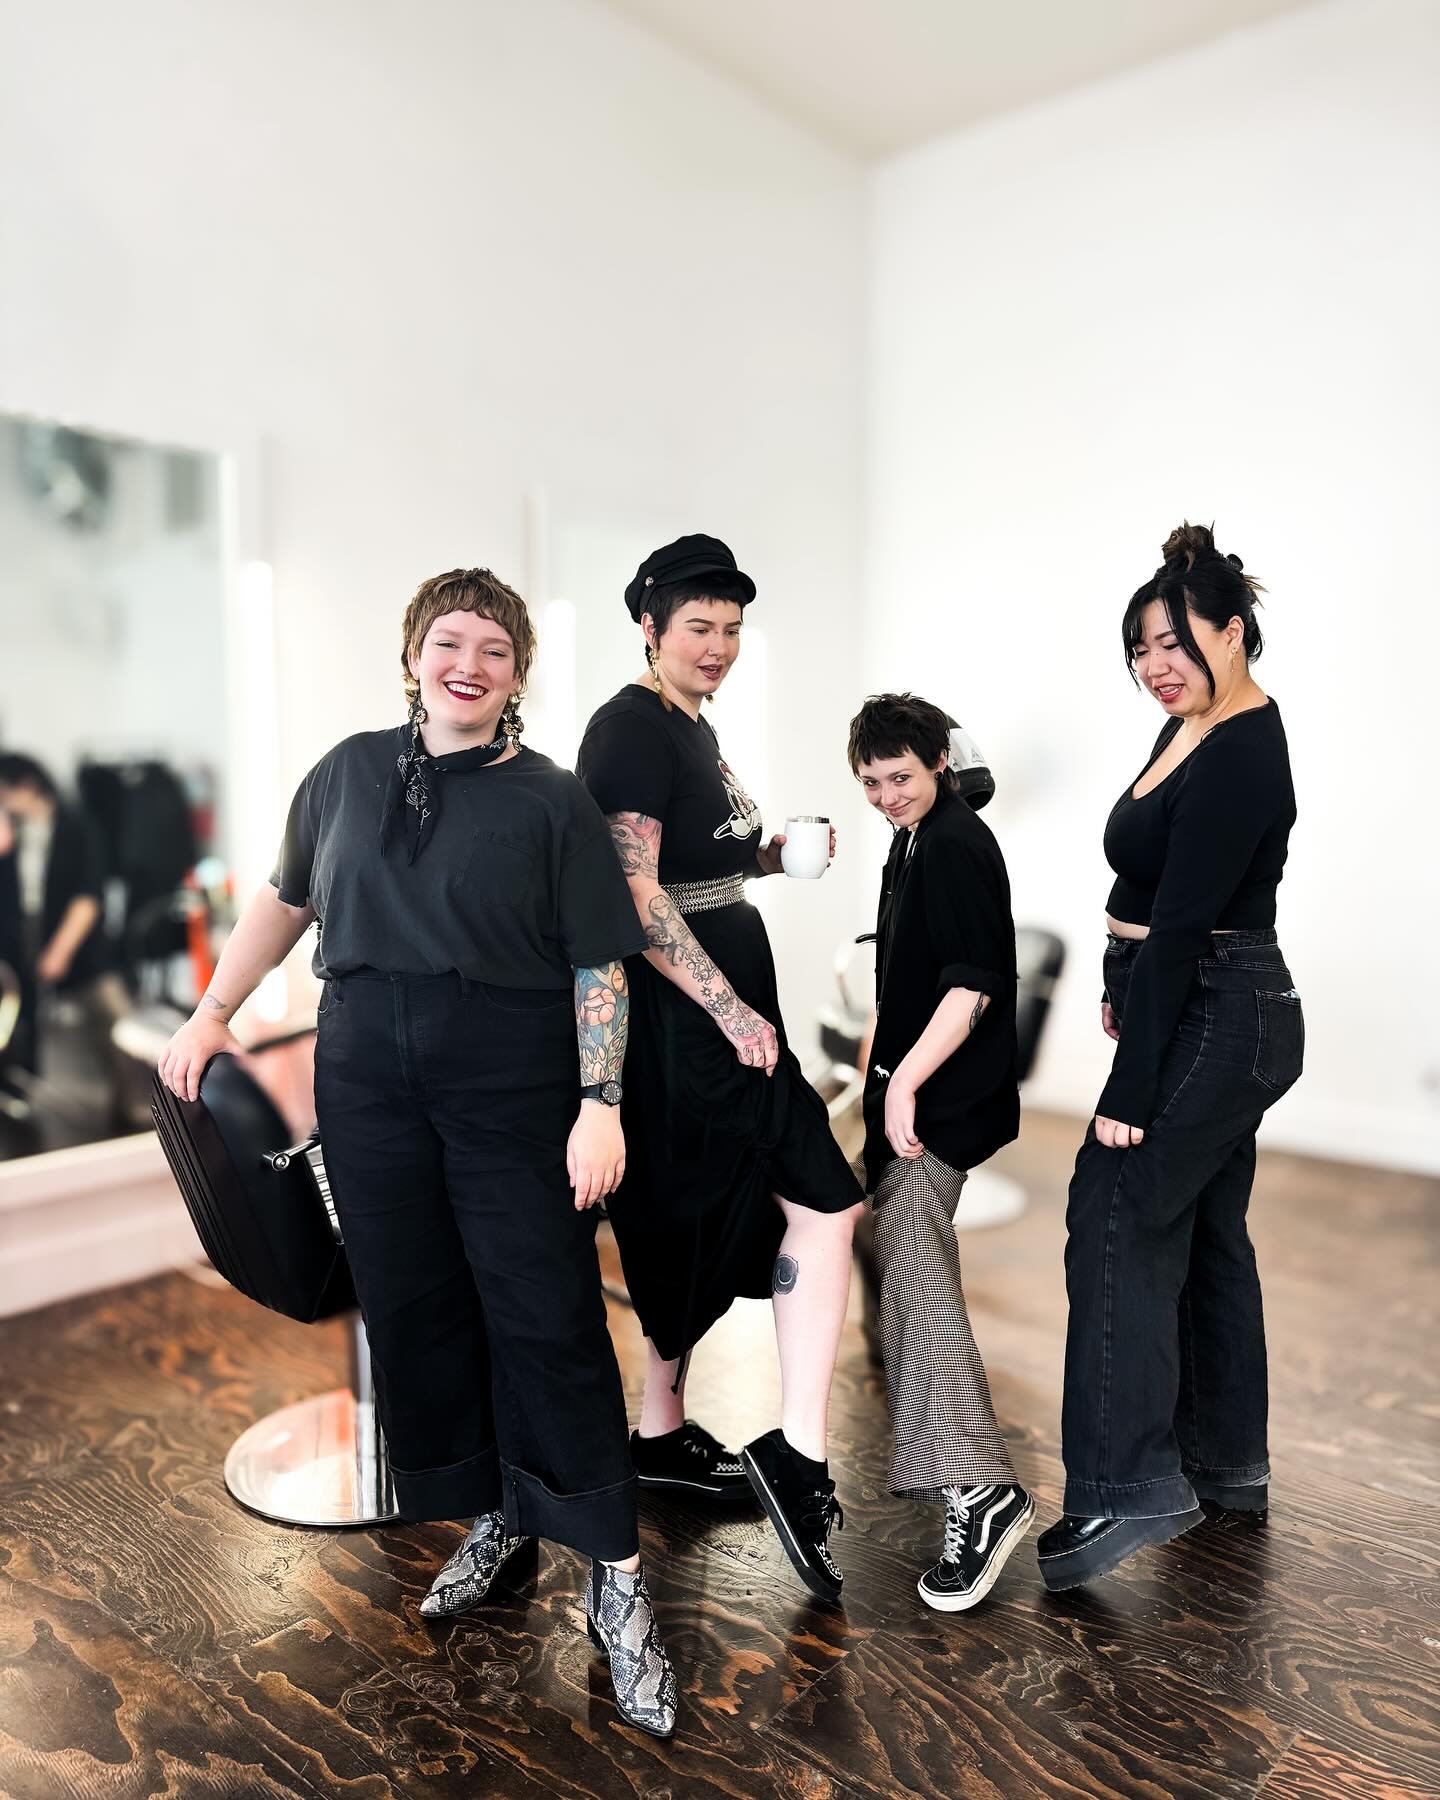 We are hairdressers, of course we dress in all black.
Completely unplanned mostly all black wardrobe day at POp . 

(509)443-5353 for bookings 
#houseofpop #thehouseofpop #salon #spokane #spokanesalon #spokanehairstylist #allarewelcome #genderneutral